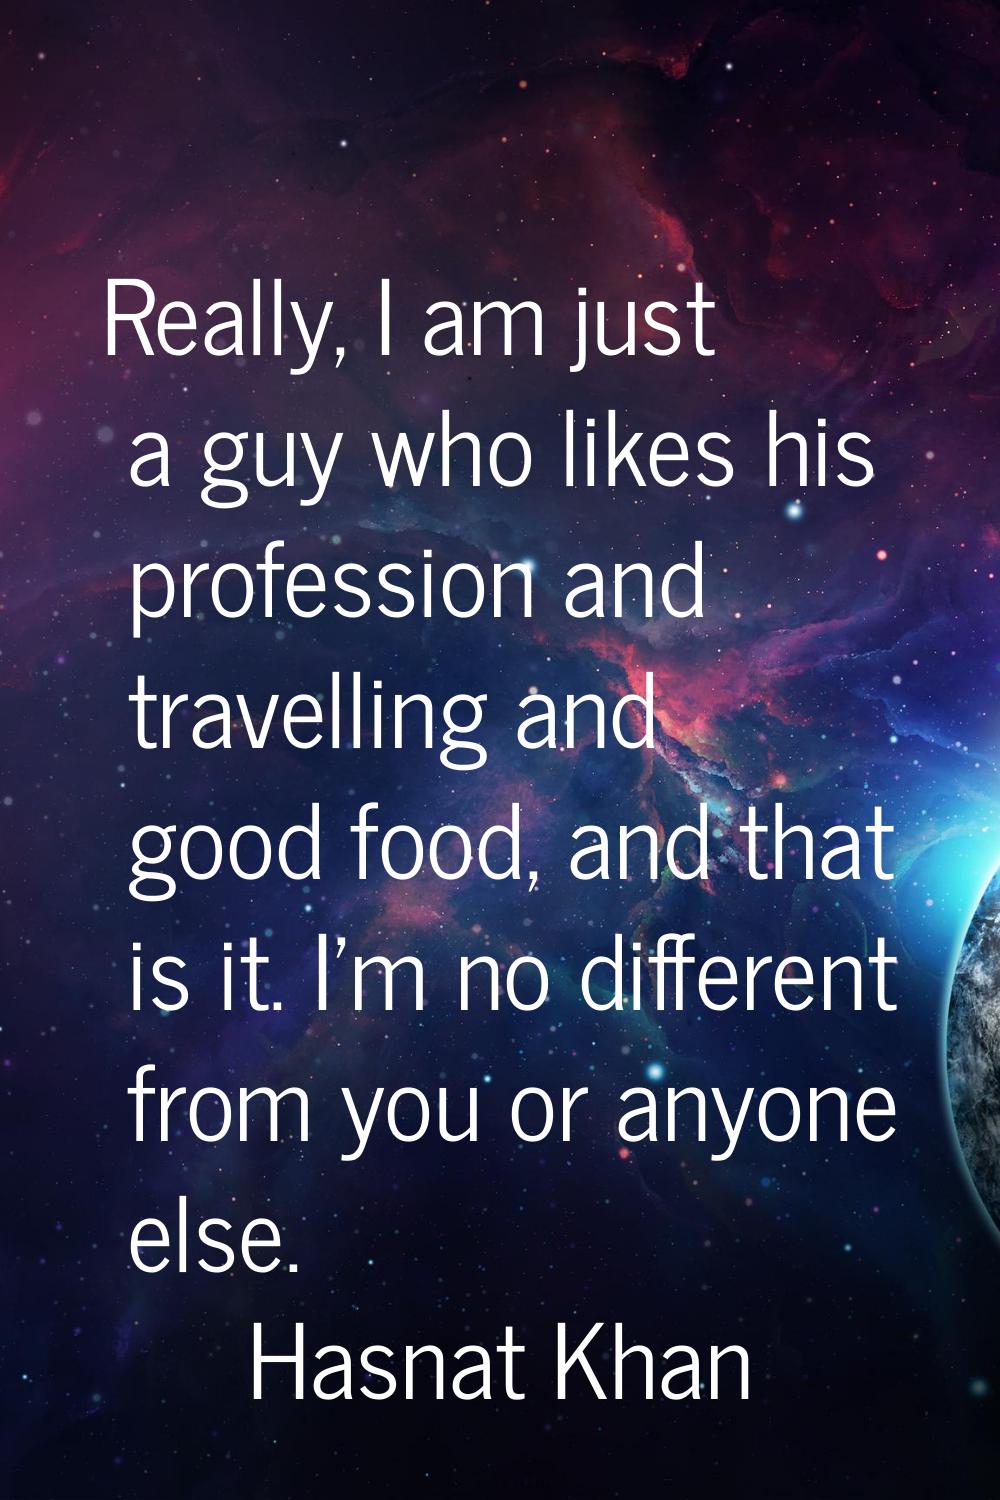 Really, I am just a guy who likes his profession and travelling and good food, and that is it. I'm 